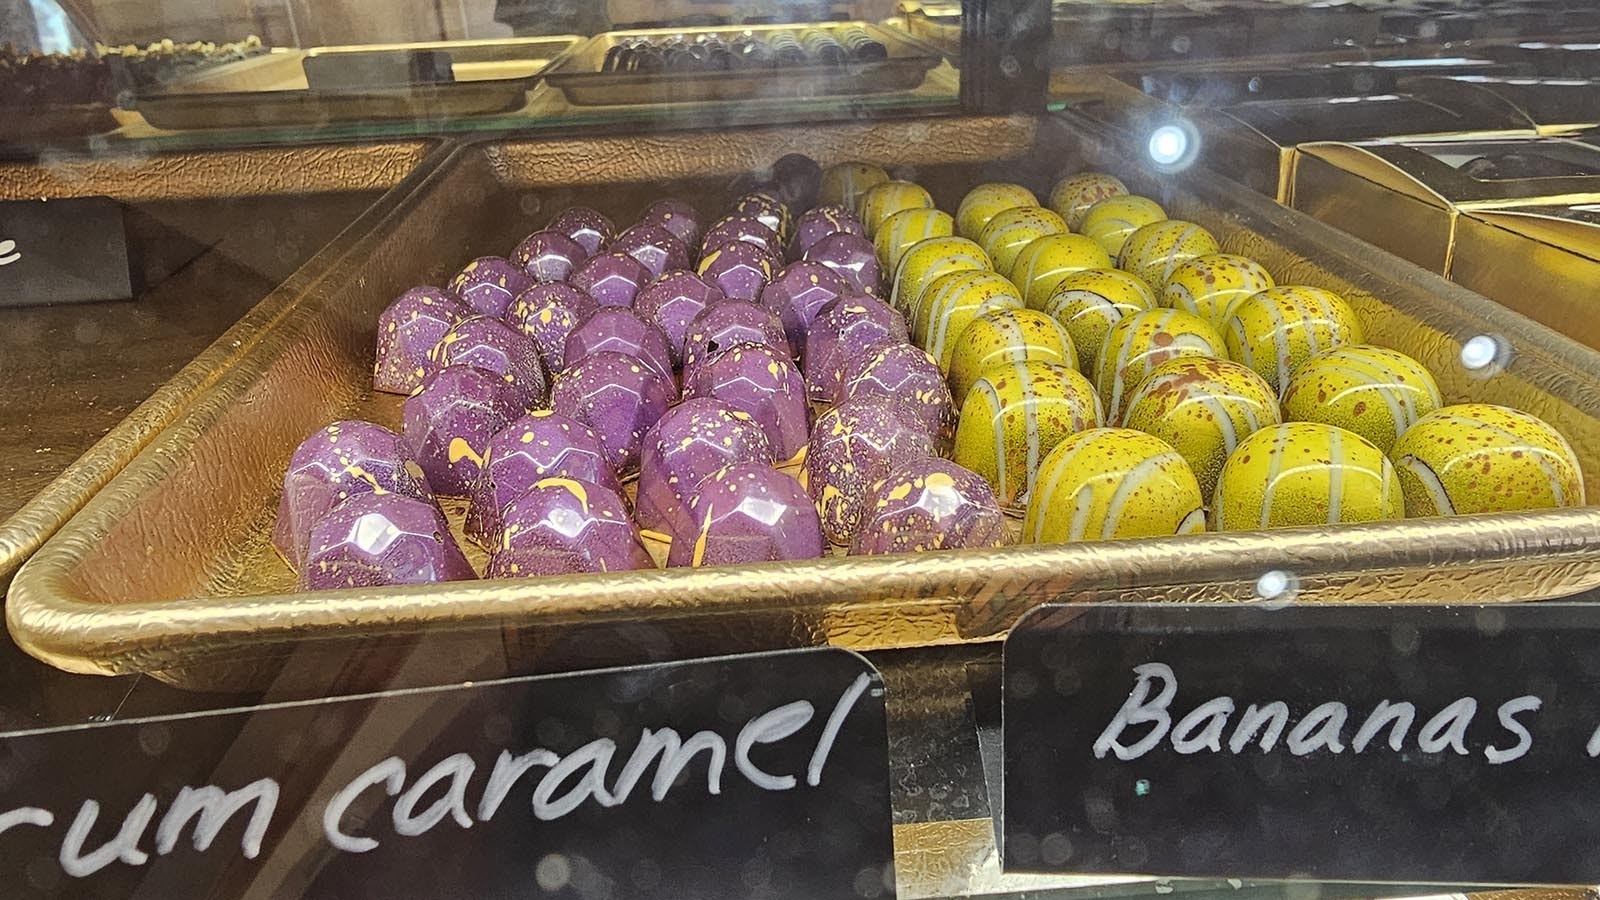 Rum caramel and banana-flavored chocolates are among the selections available at The Bread Doctor bakery.